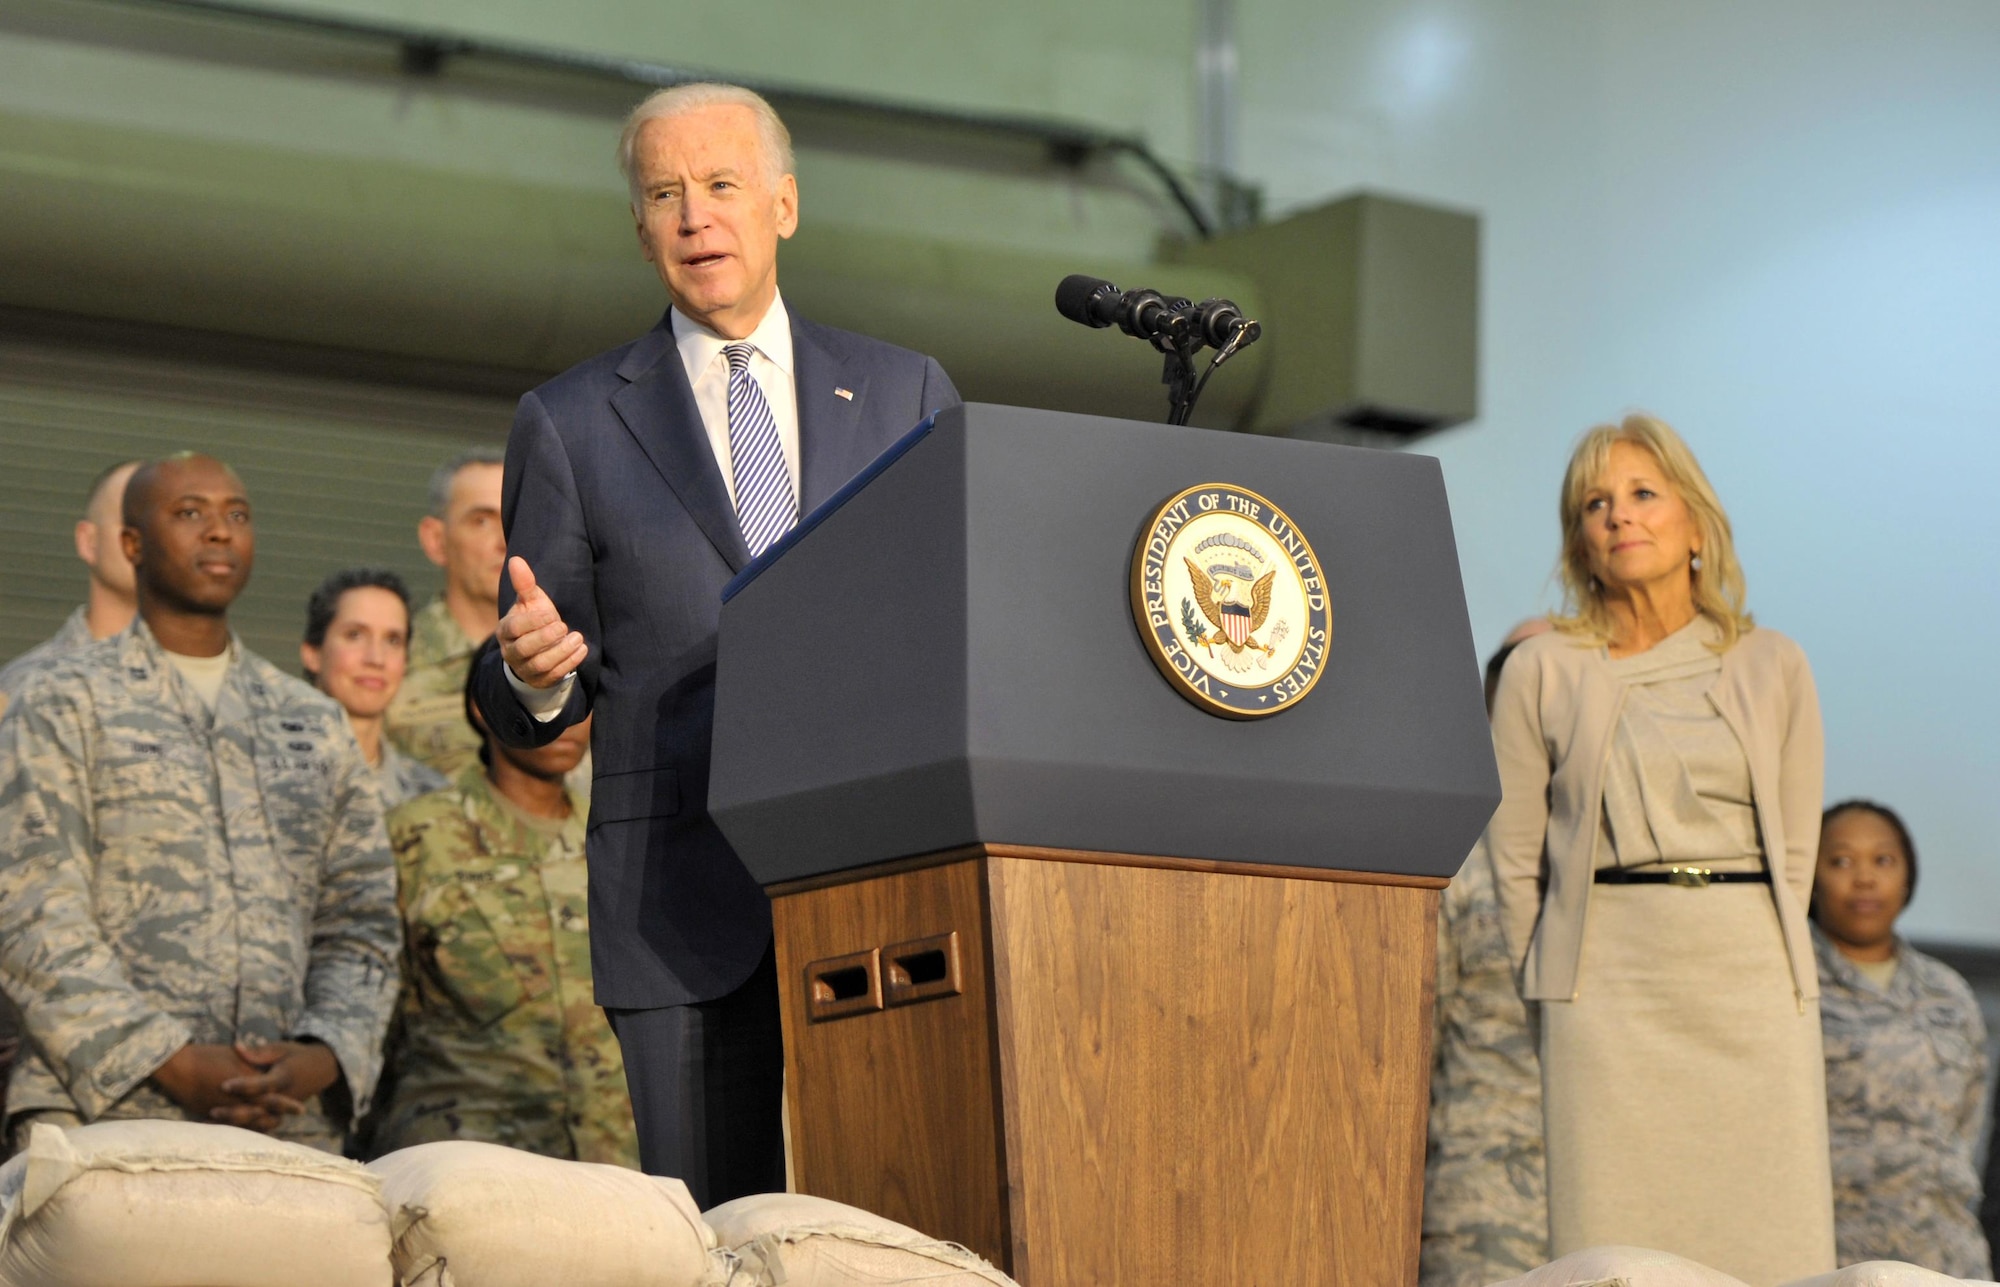 Vice President Joe Biden speaks with U.S. and coalition personnel during a visit to an undisclosed location in Southwest Asia, March 7, 2016. Biden’s visit is part of his tour of the Mideast, which began March 7, 2016. (U.S. Air Force photo by Staff Sgt. Kentavist P. Brackin/released)